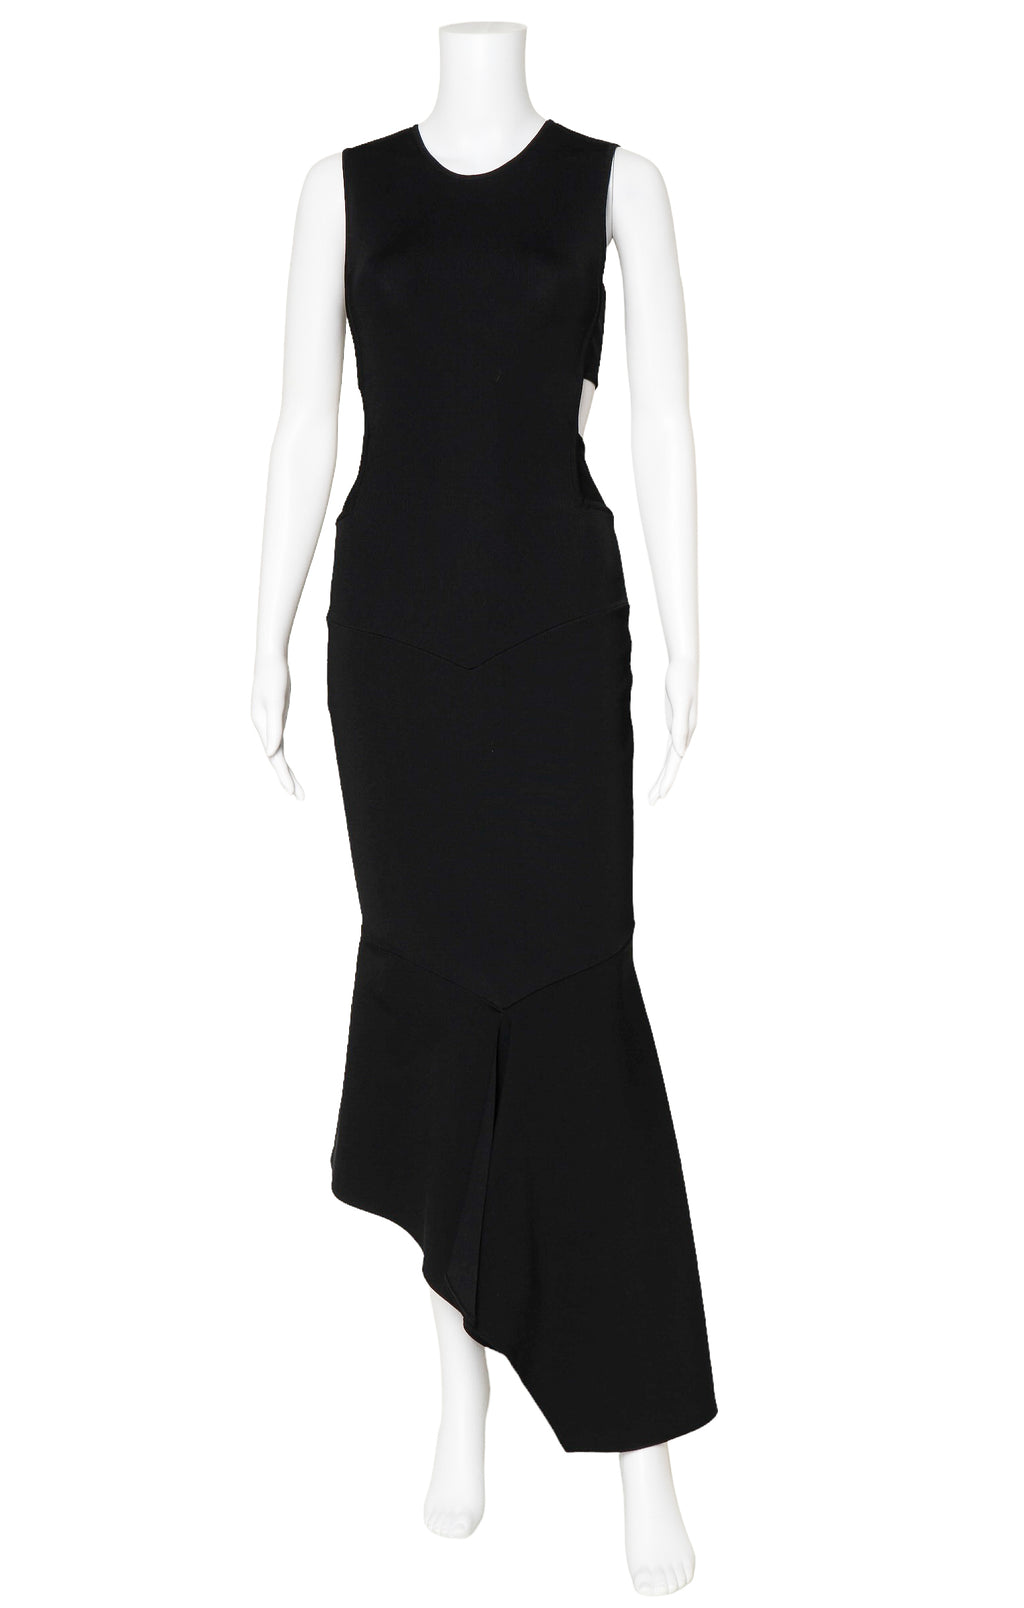 ALEXANDRE VAUTHIER (RARE) Dress  Size: FR 38 / Comparable to US 4-6